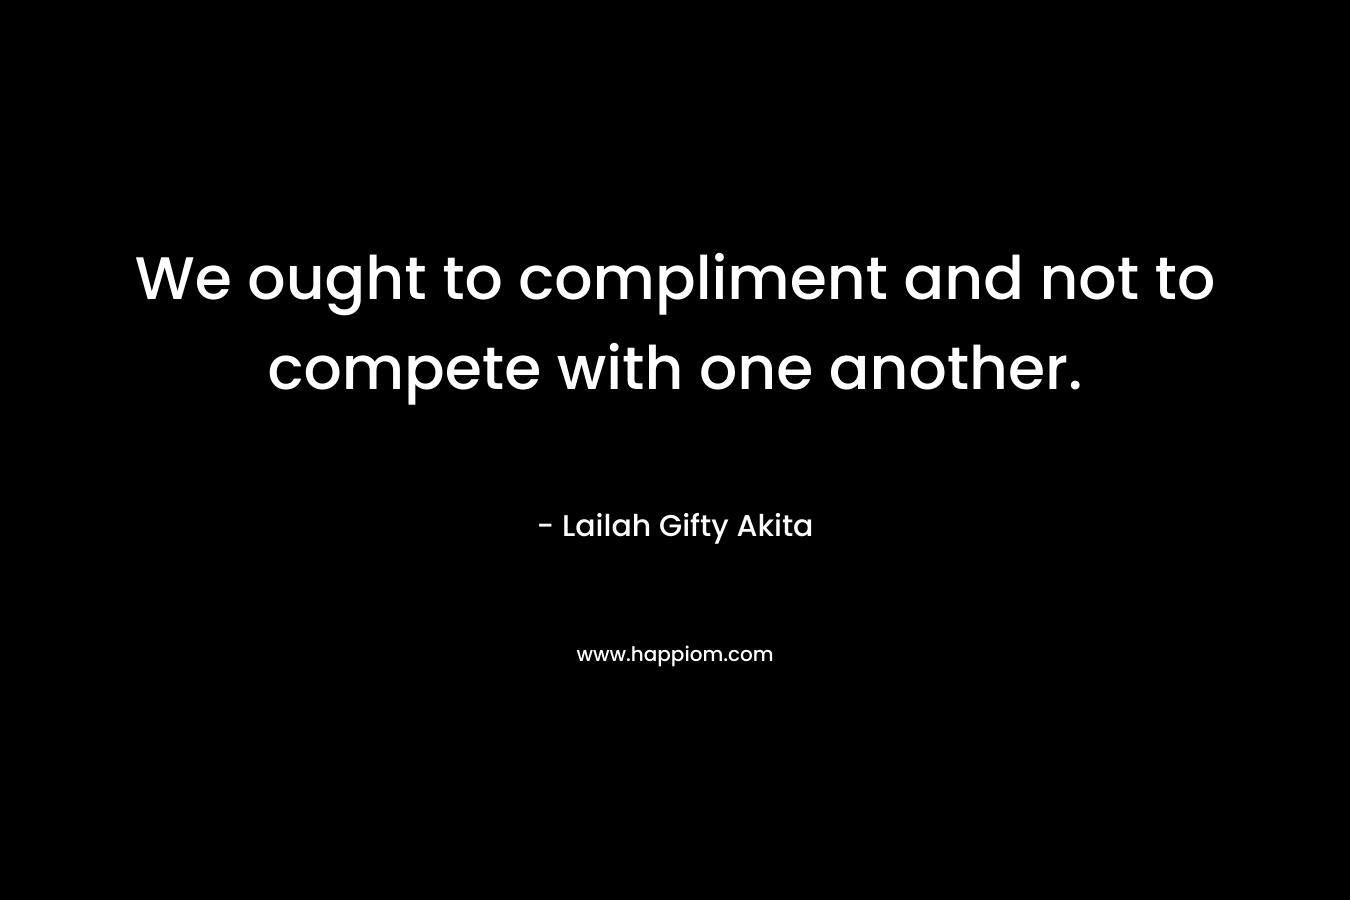 We ought to compliment and not to compete with one another.